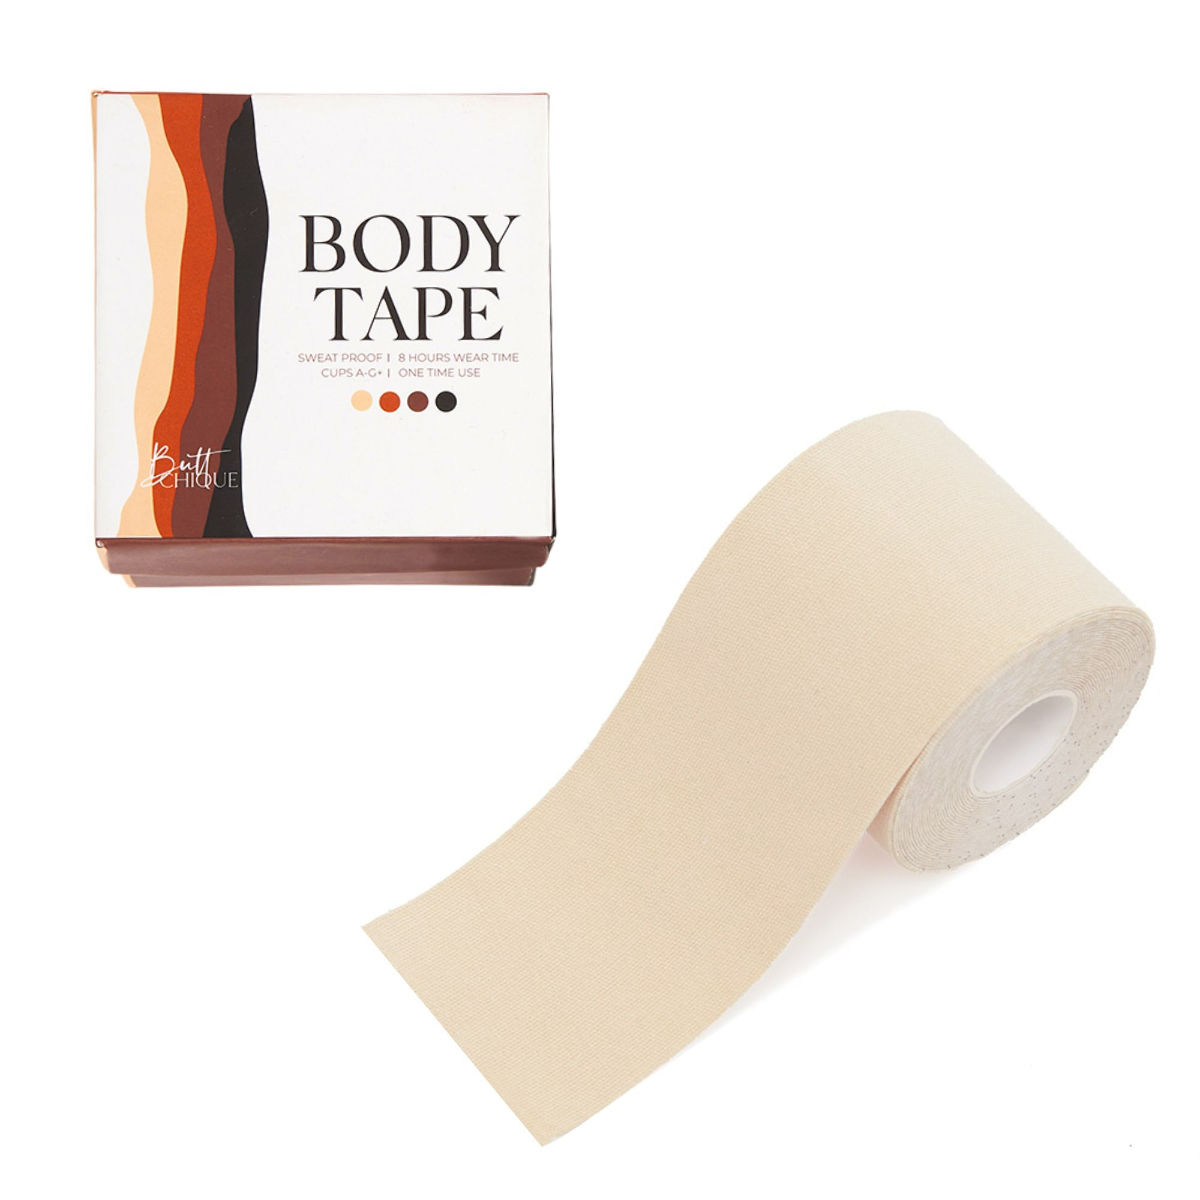 How To Use Body Tape？